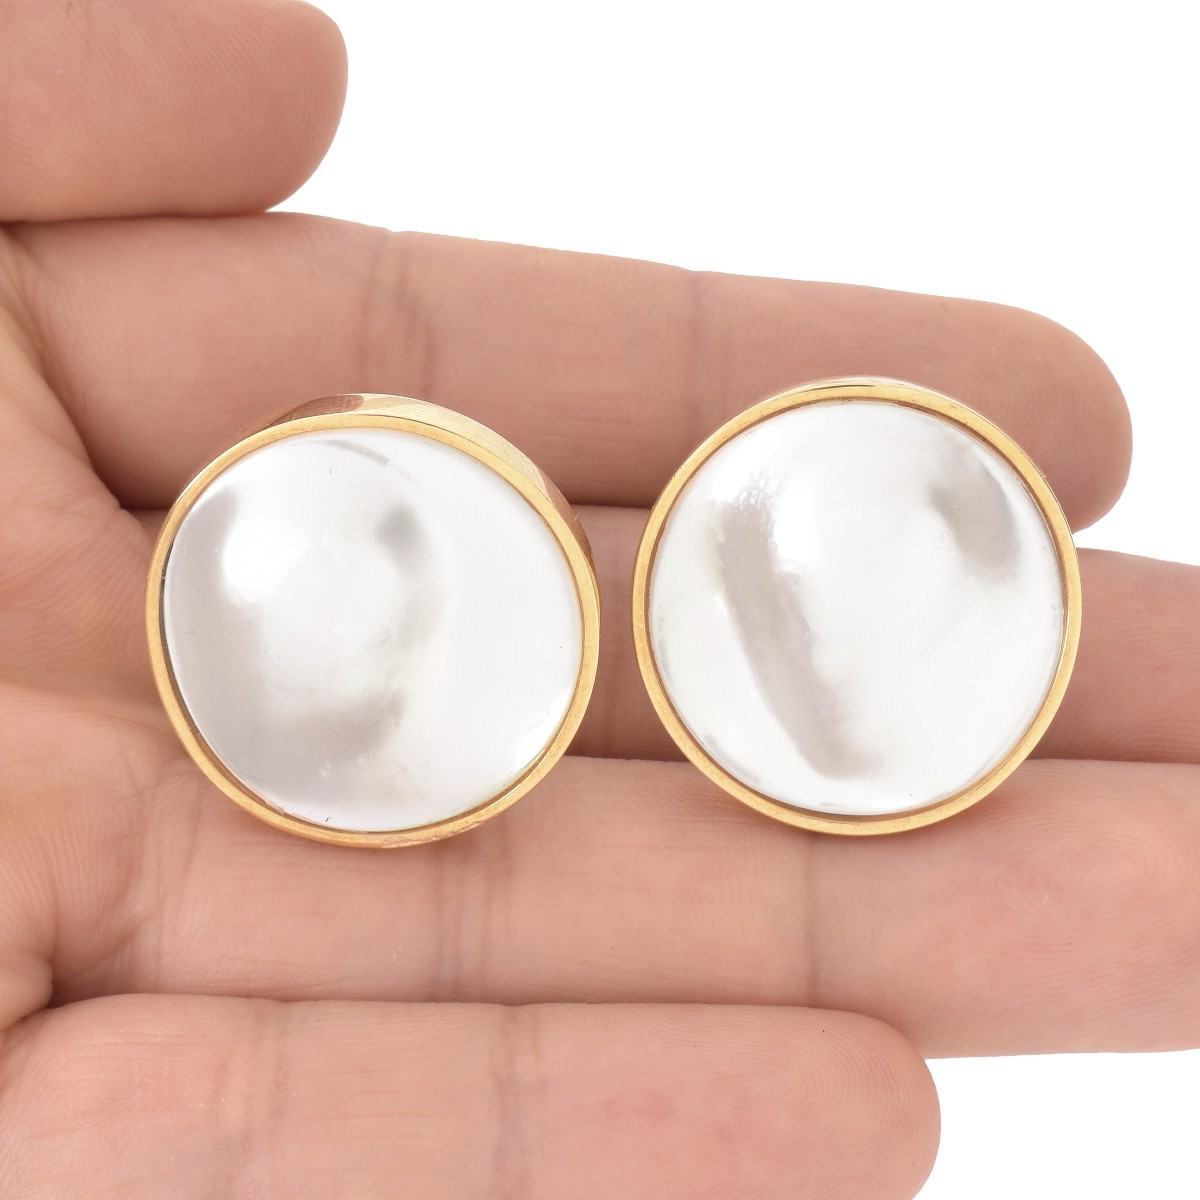 Vintage Mabe Pearl and 14K Earrings